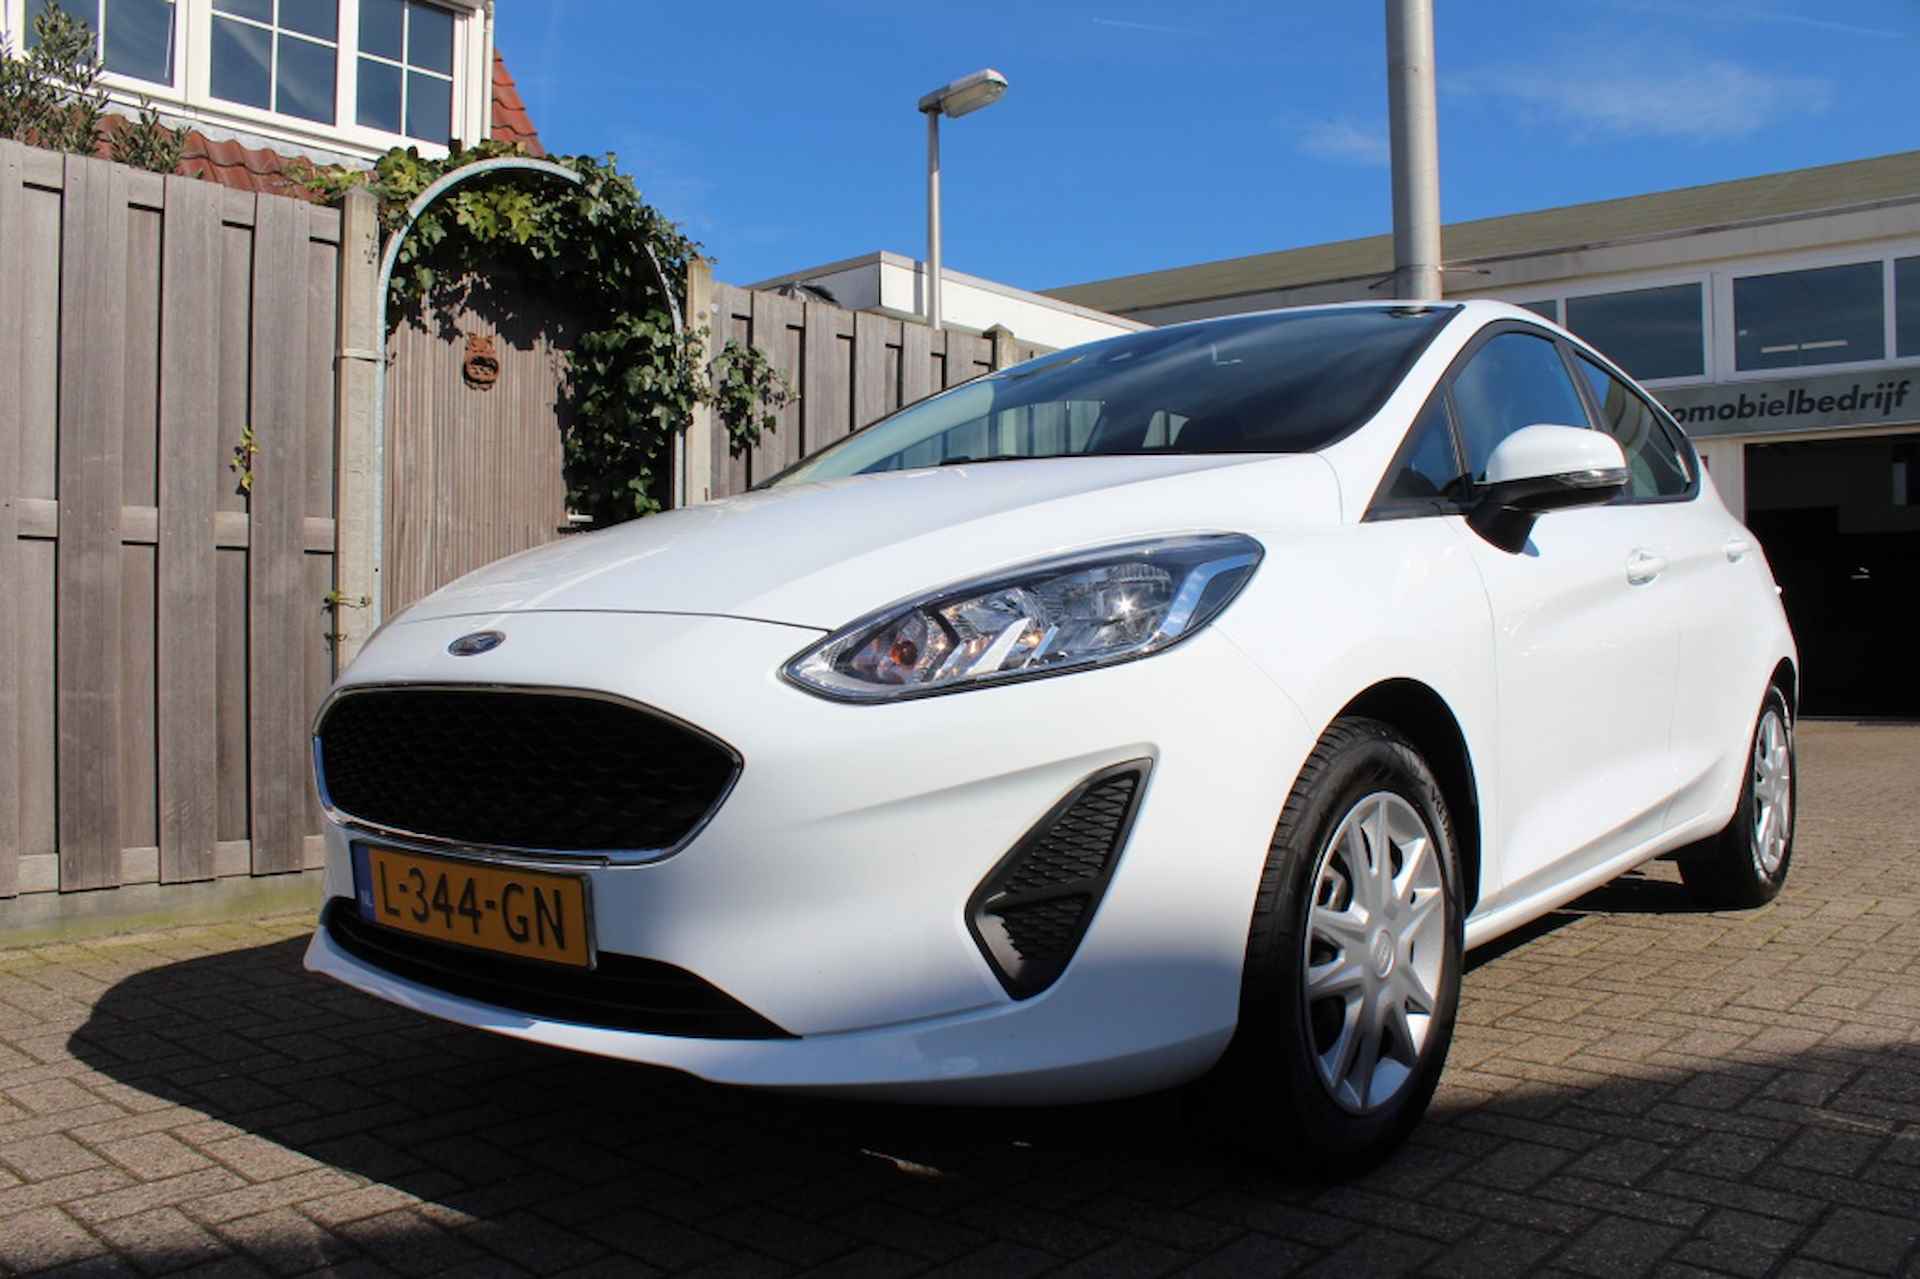 Ford Fiesta 1.0 EcoB. Connected - 9/23